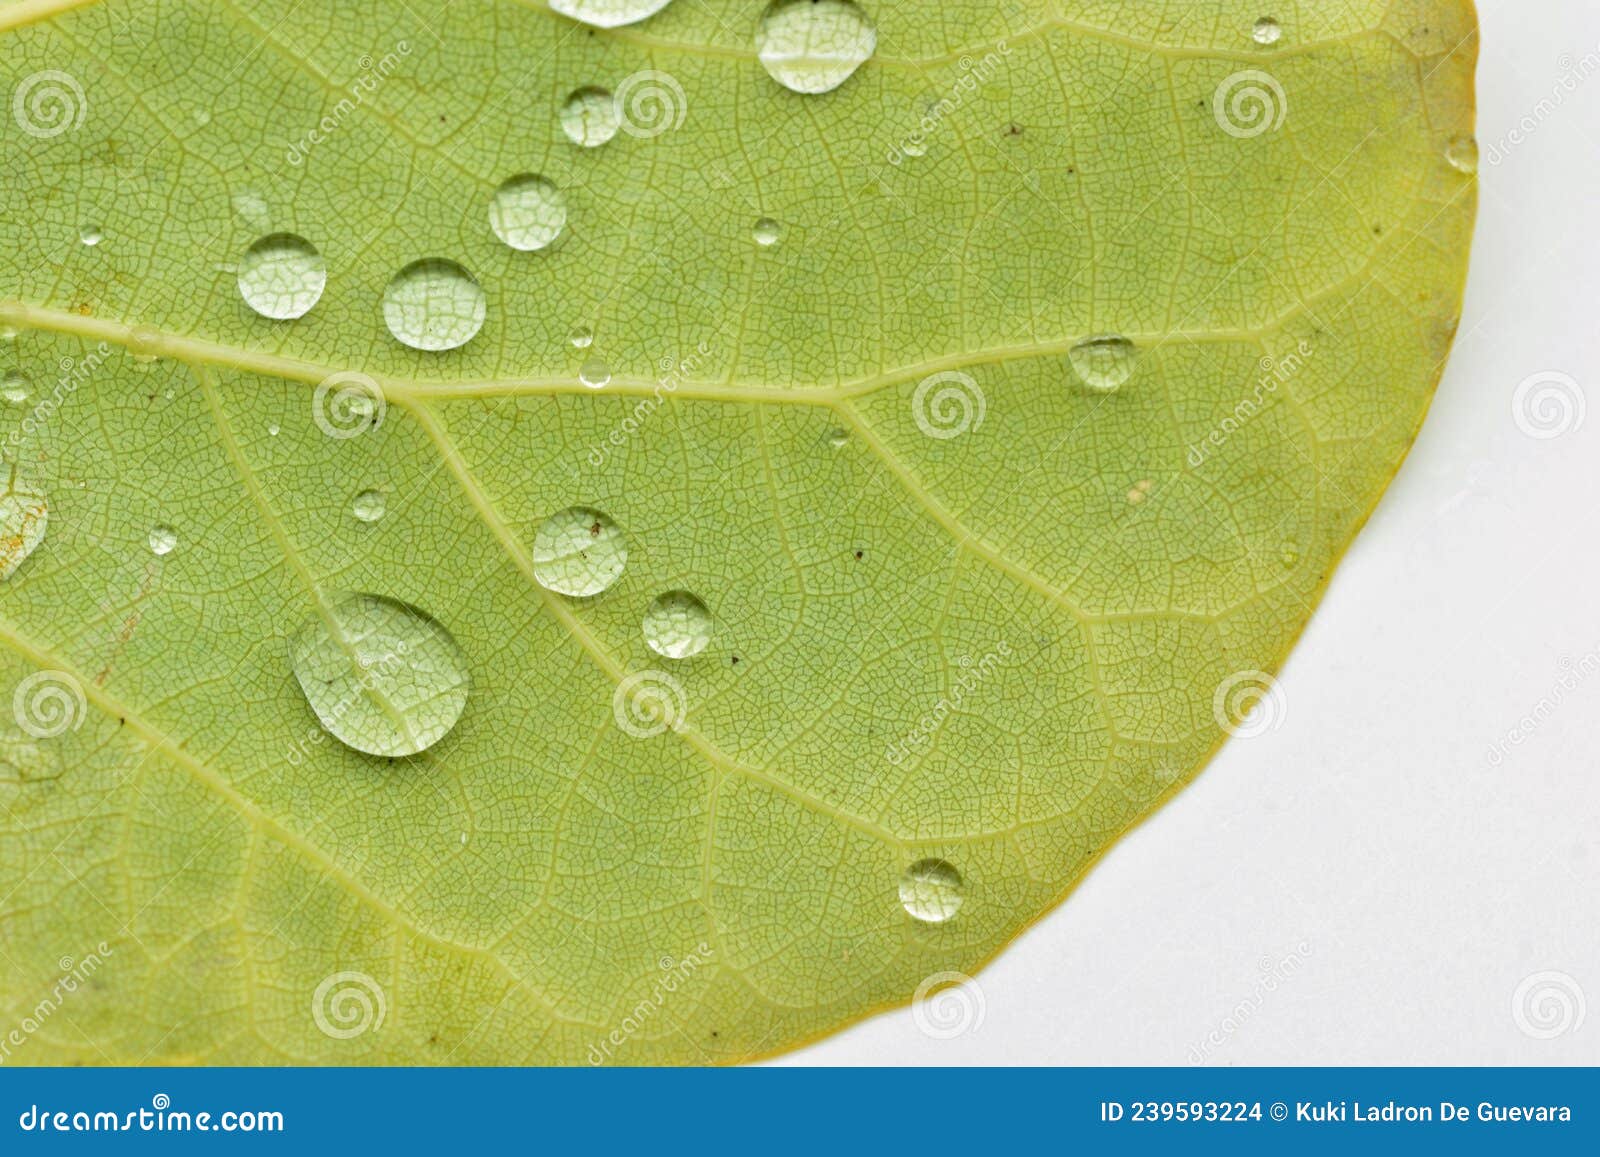 some drops of water on a leaf